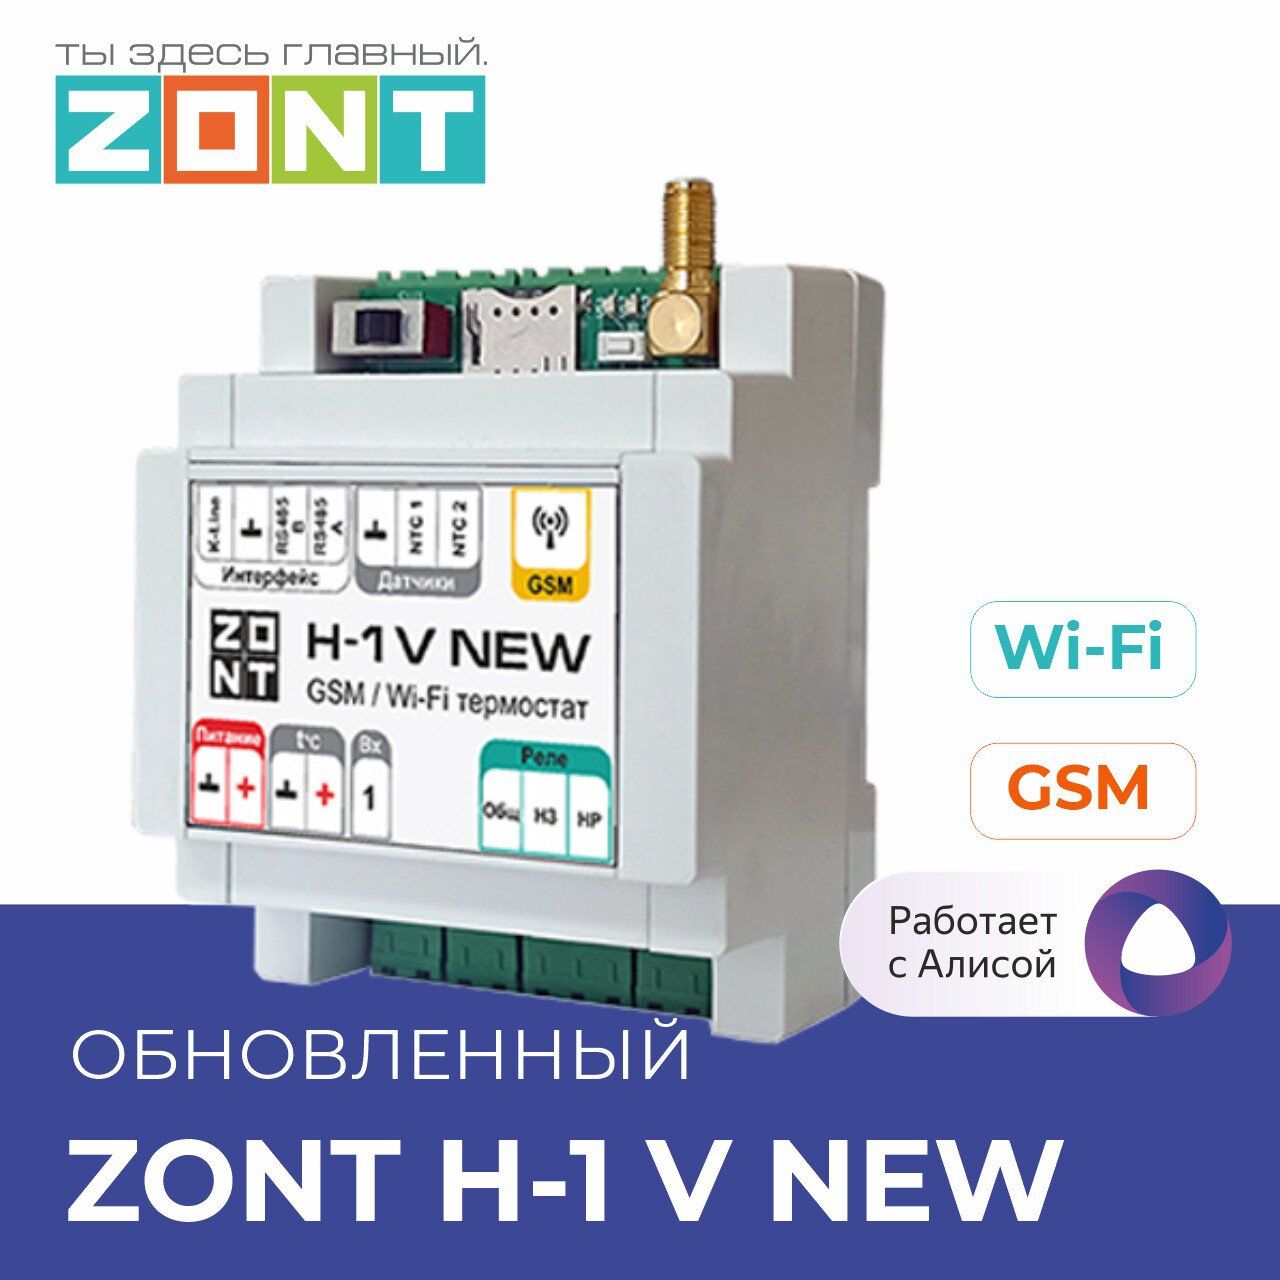 Zont H-1V NEW Wi-Fi и GSM 1